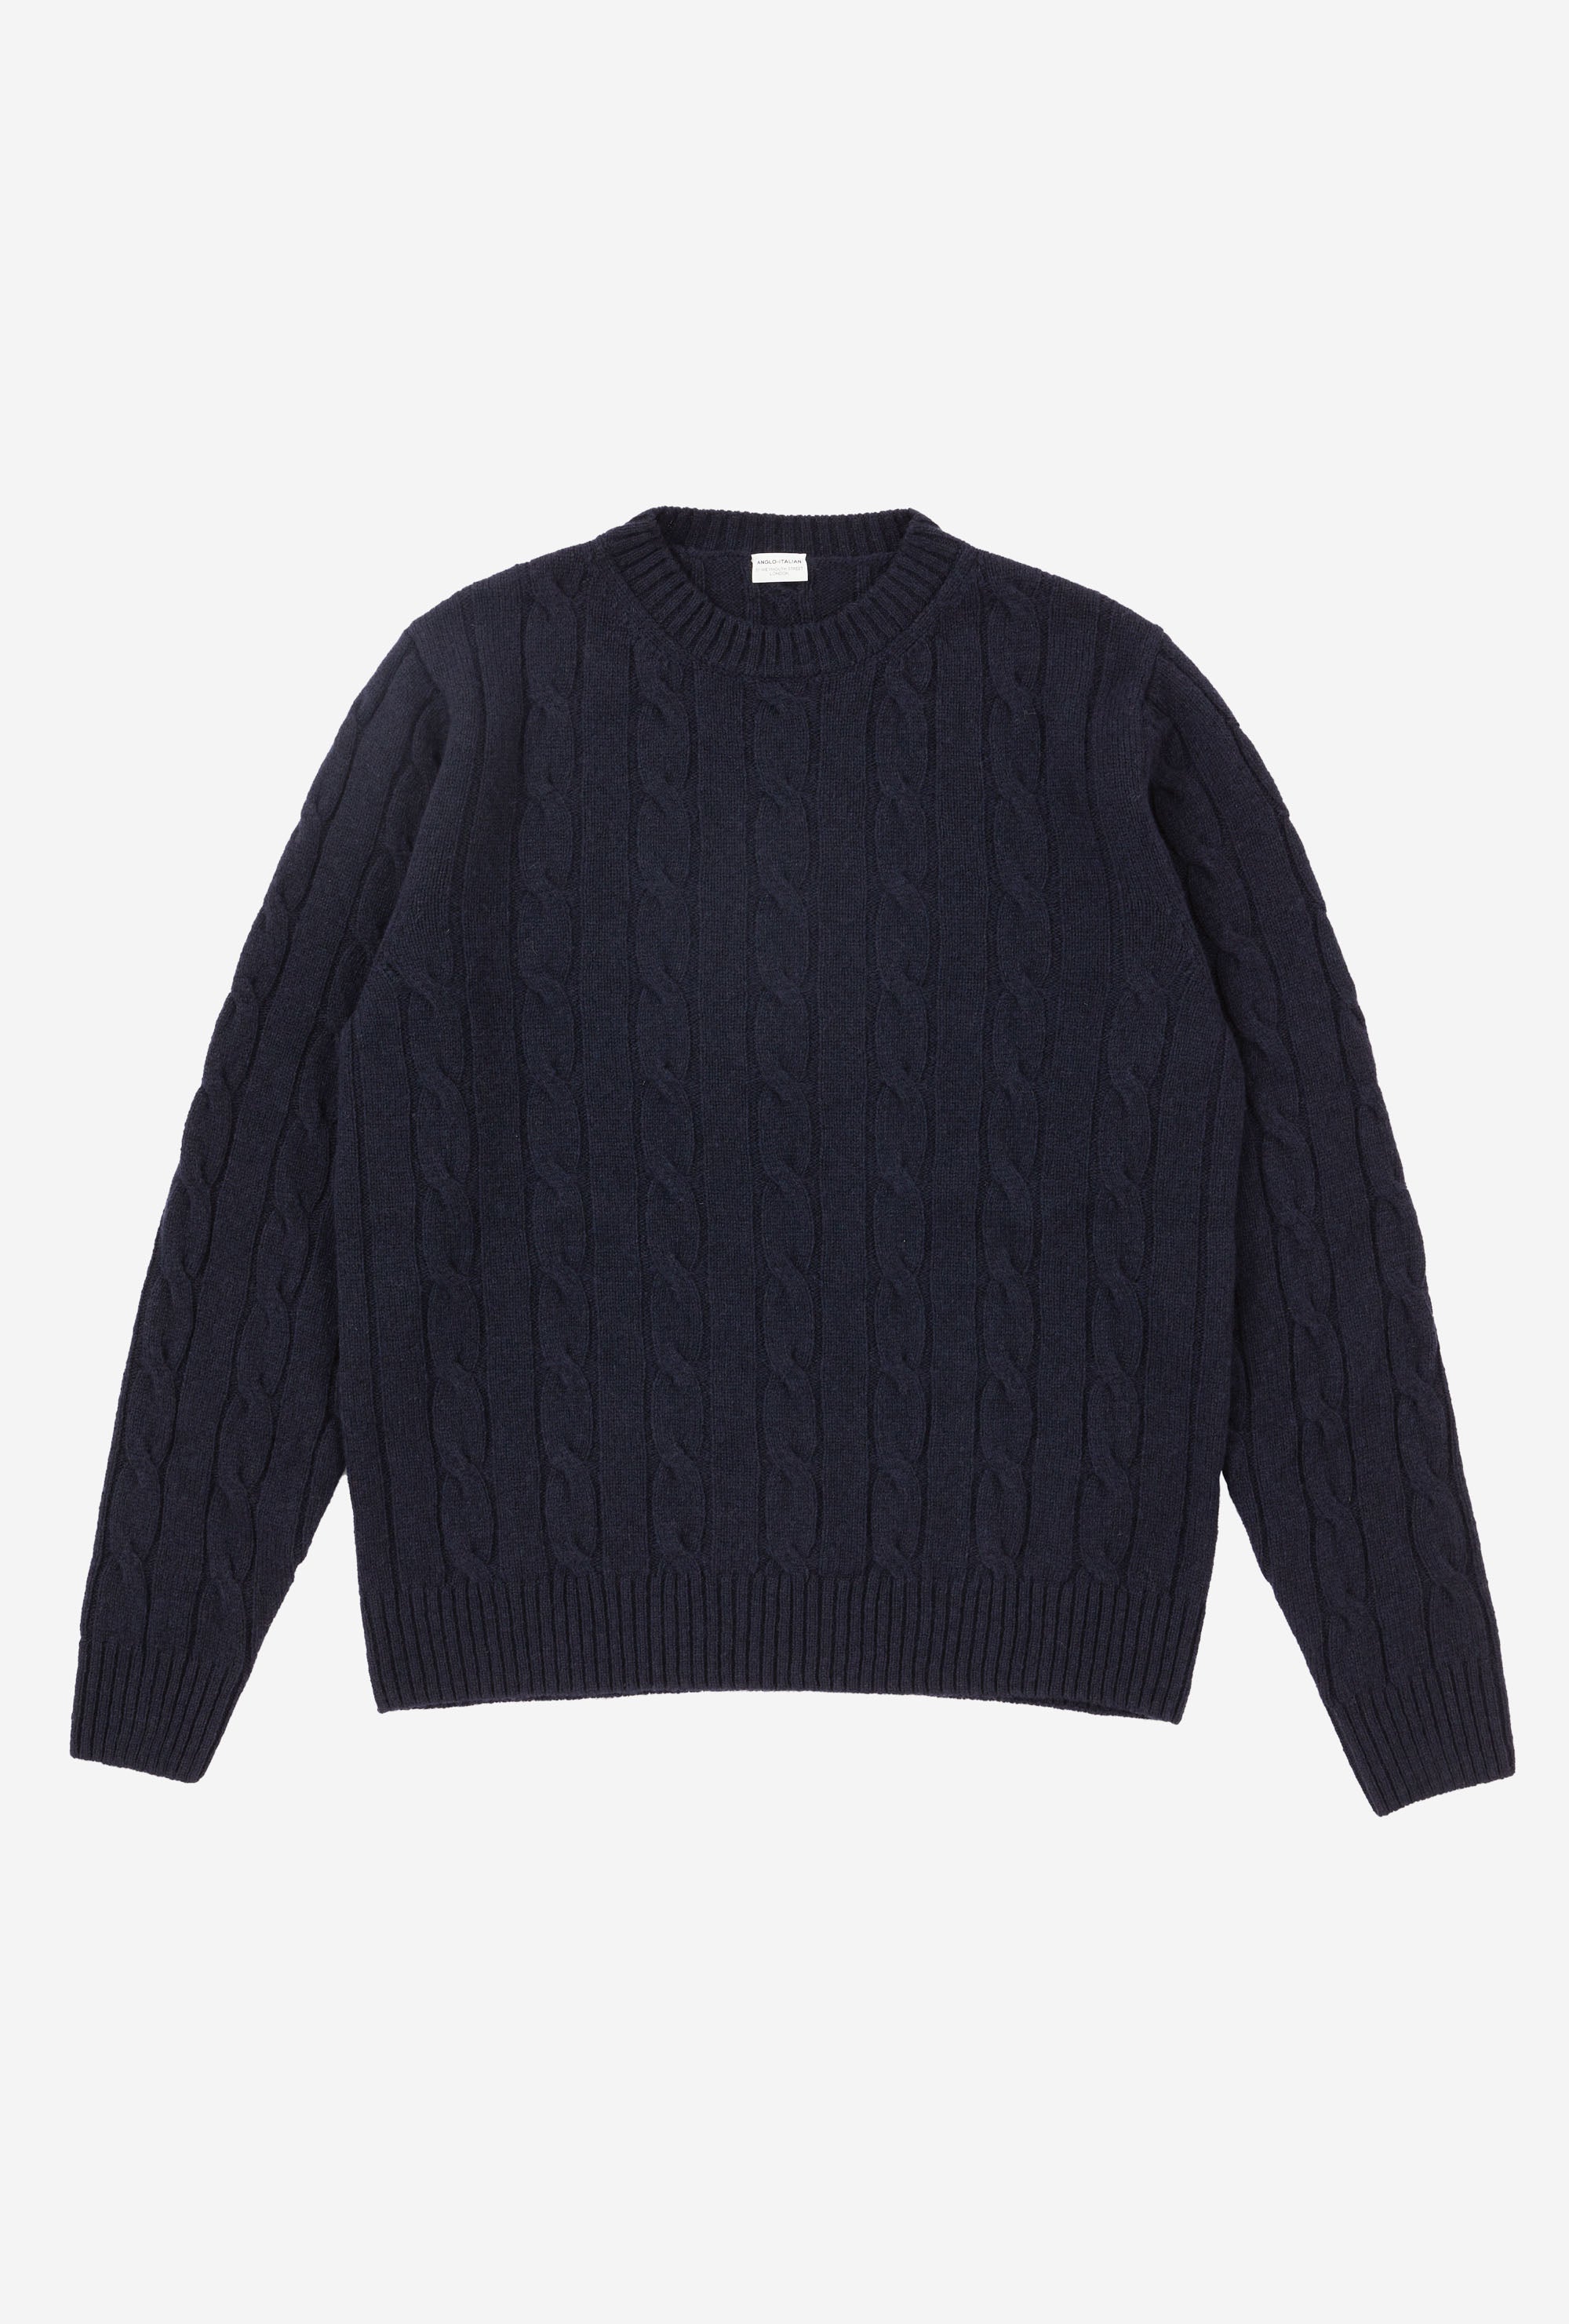 Cableknit Lambswool Navy